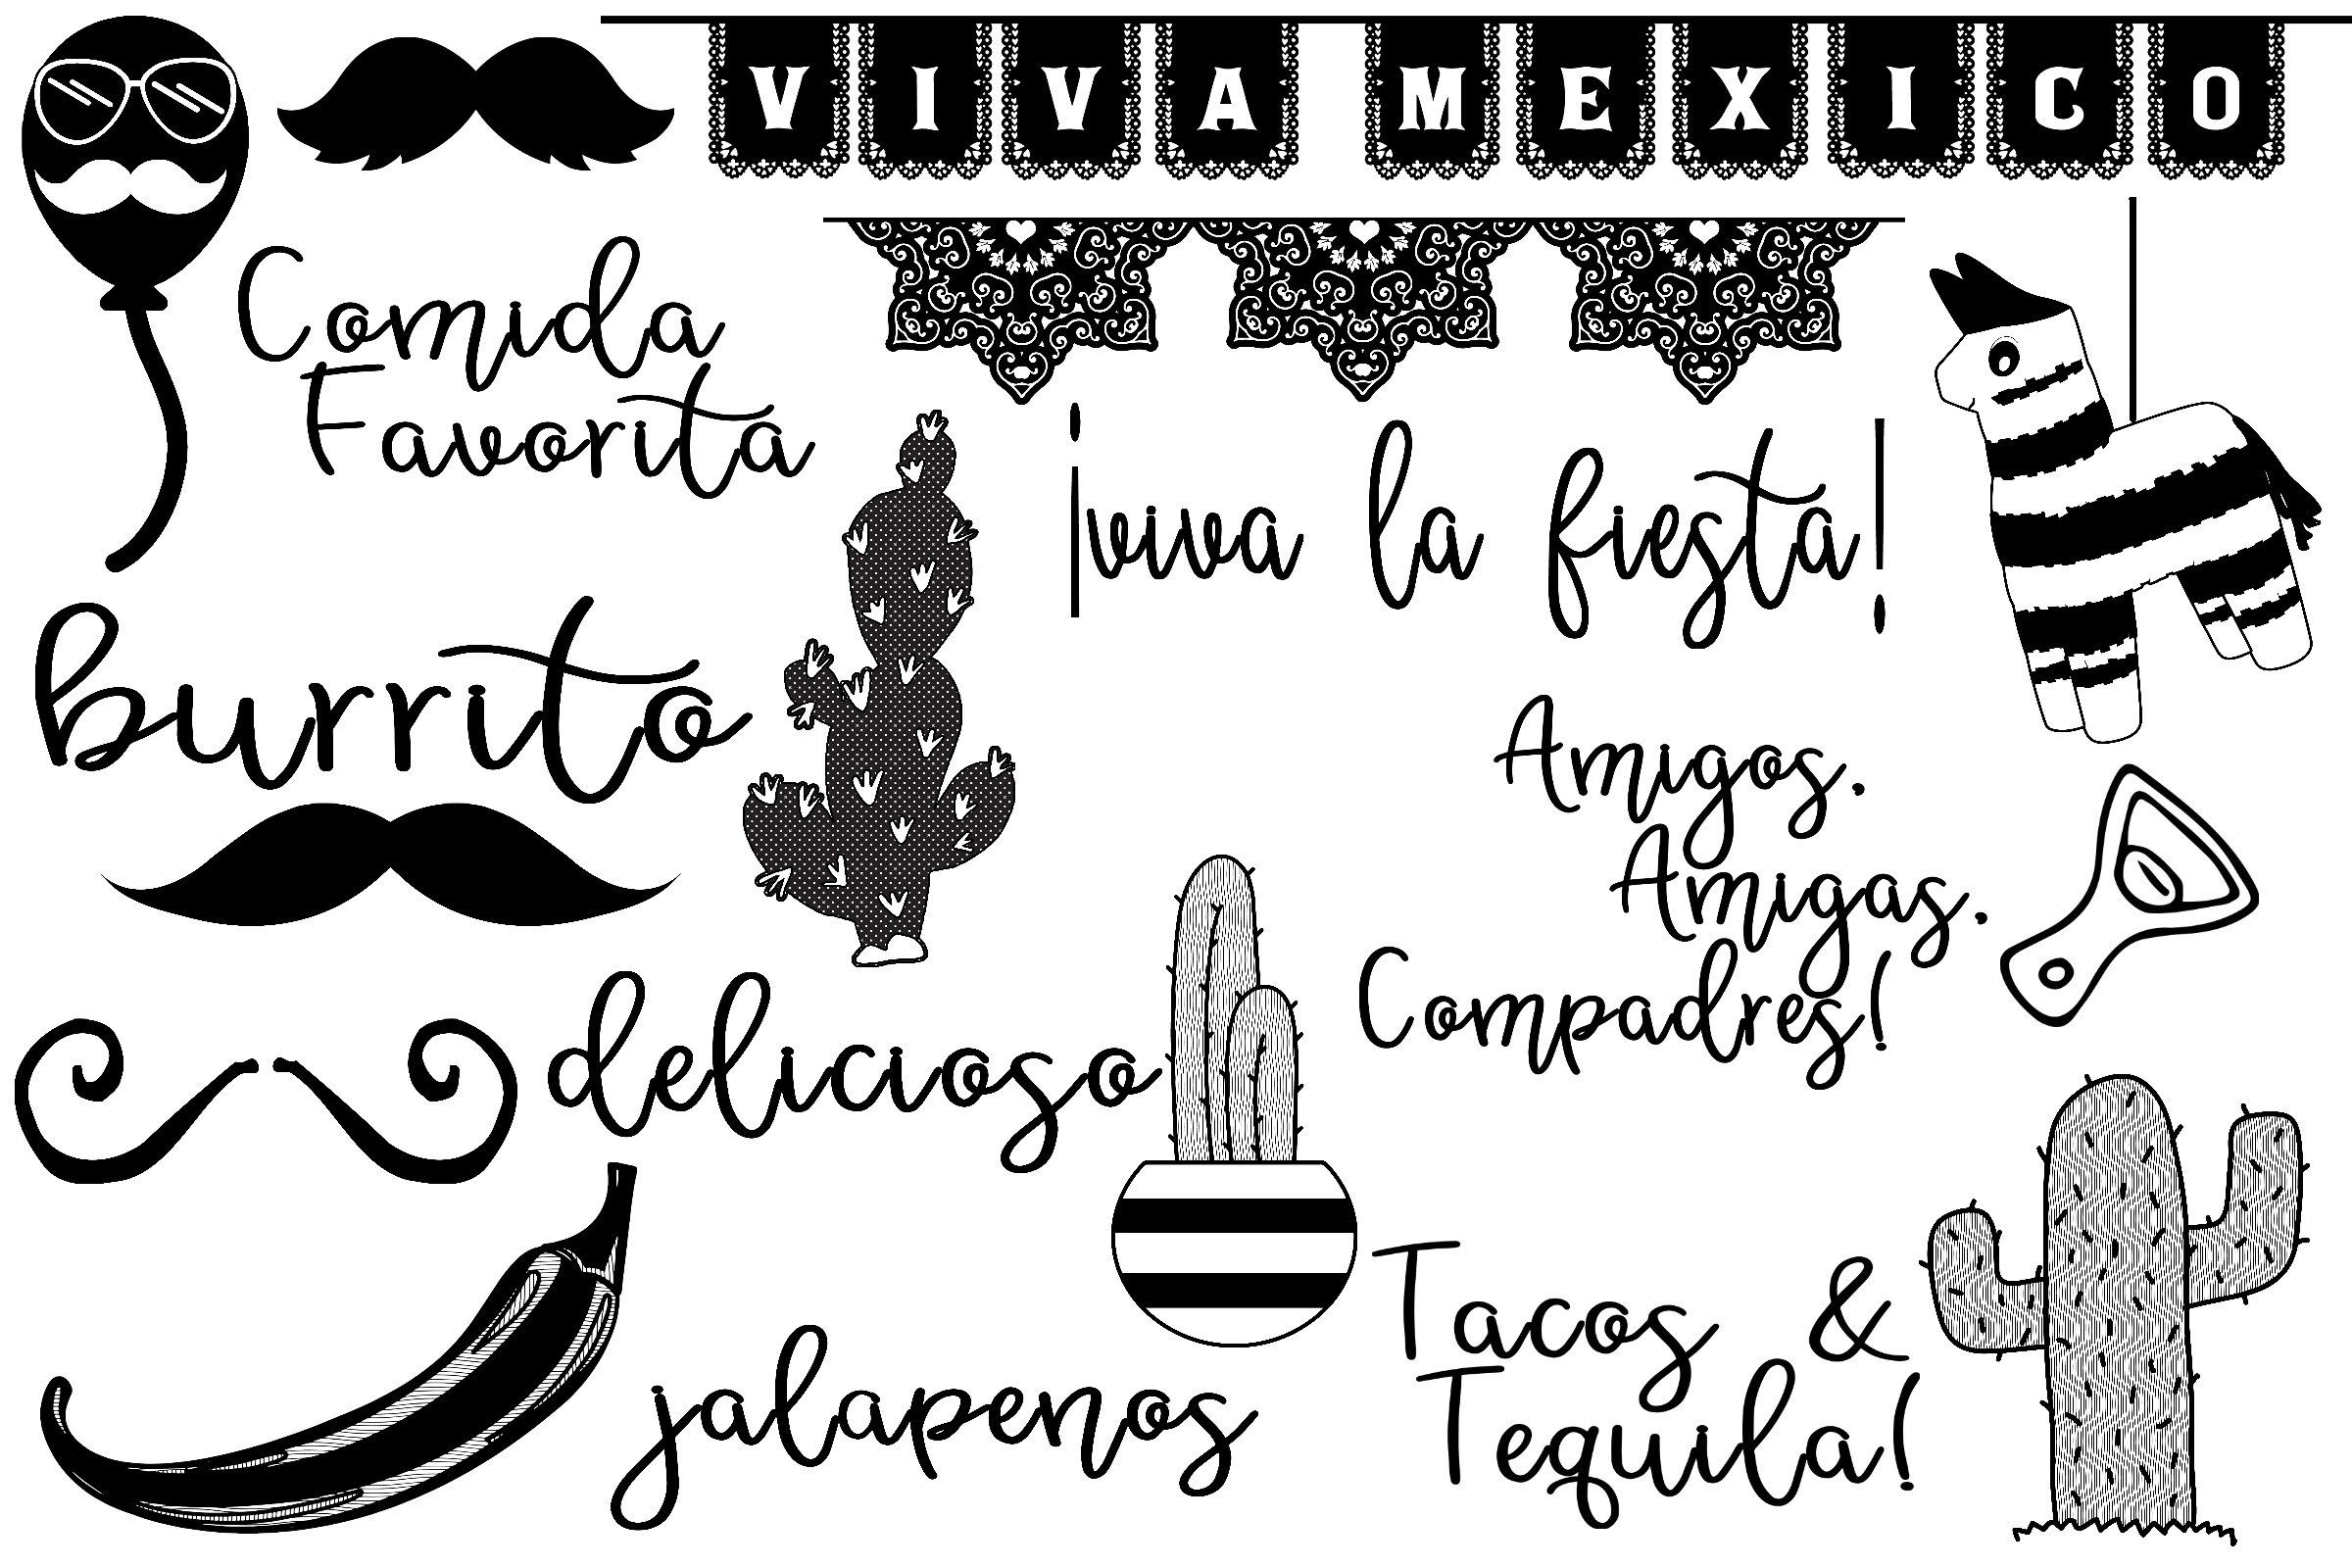 Lettering and BW elements in a Mexican style.